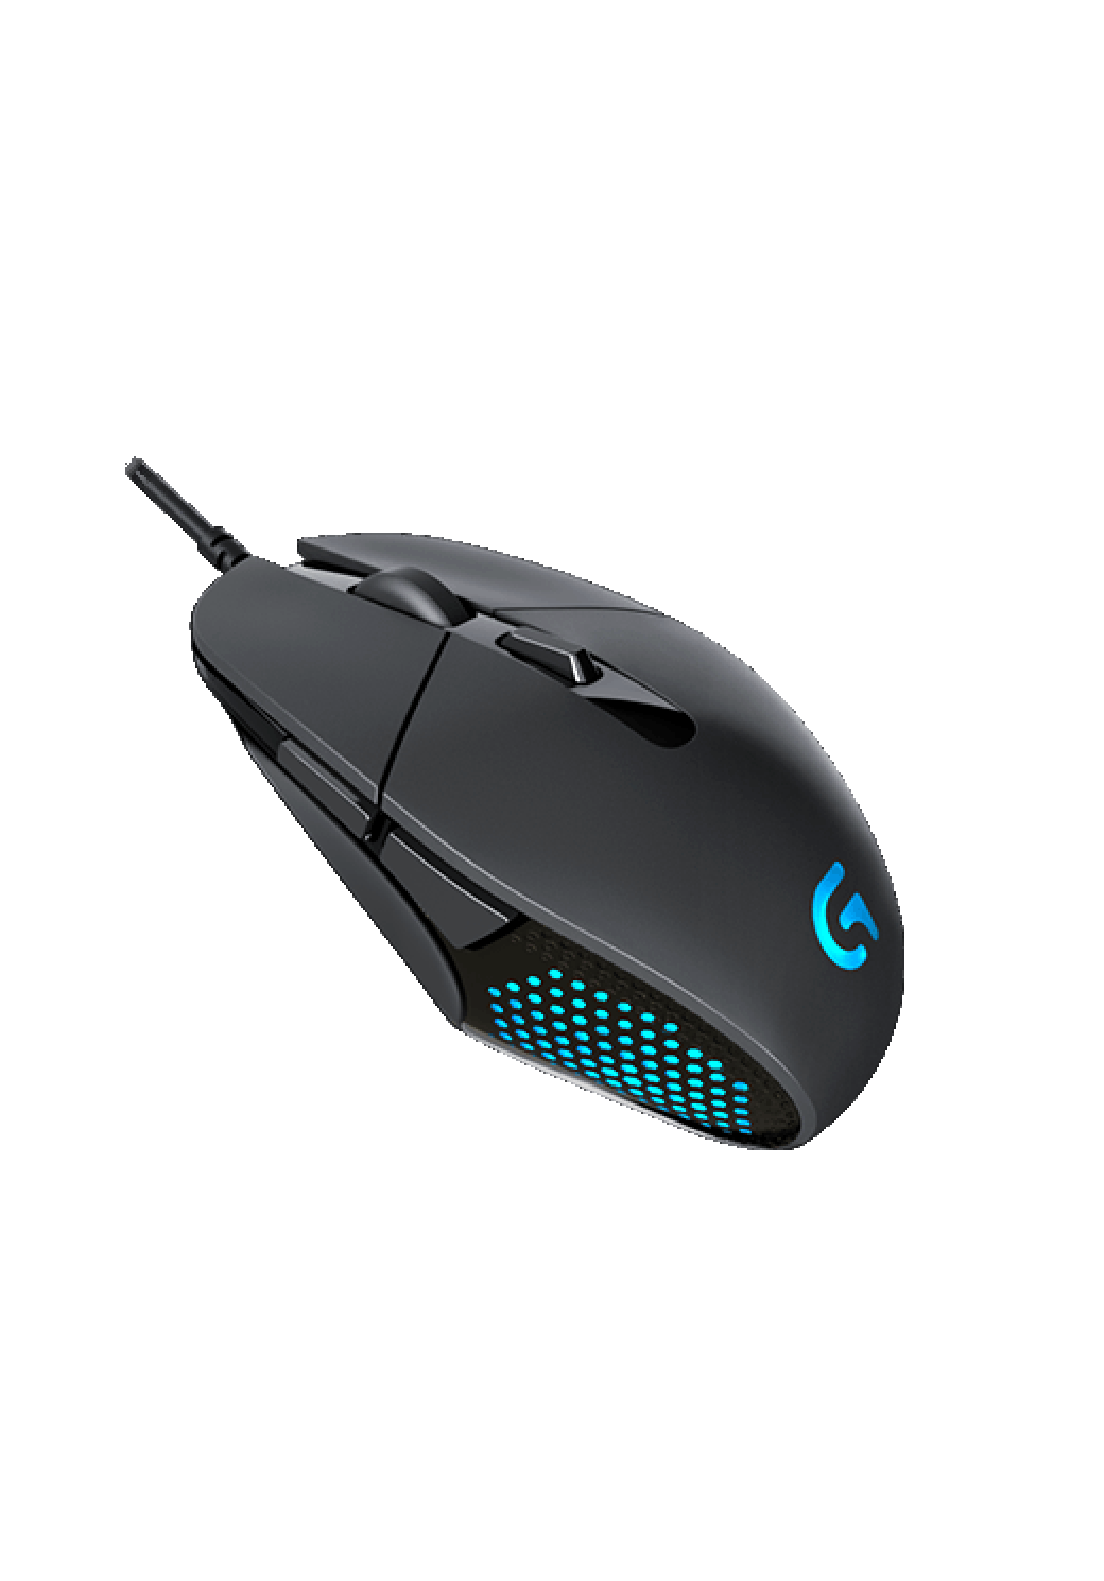 Logitech G302  Best MOBA mouse for only $49 